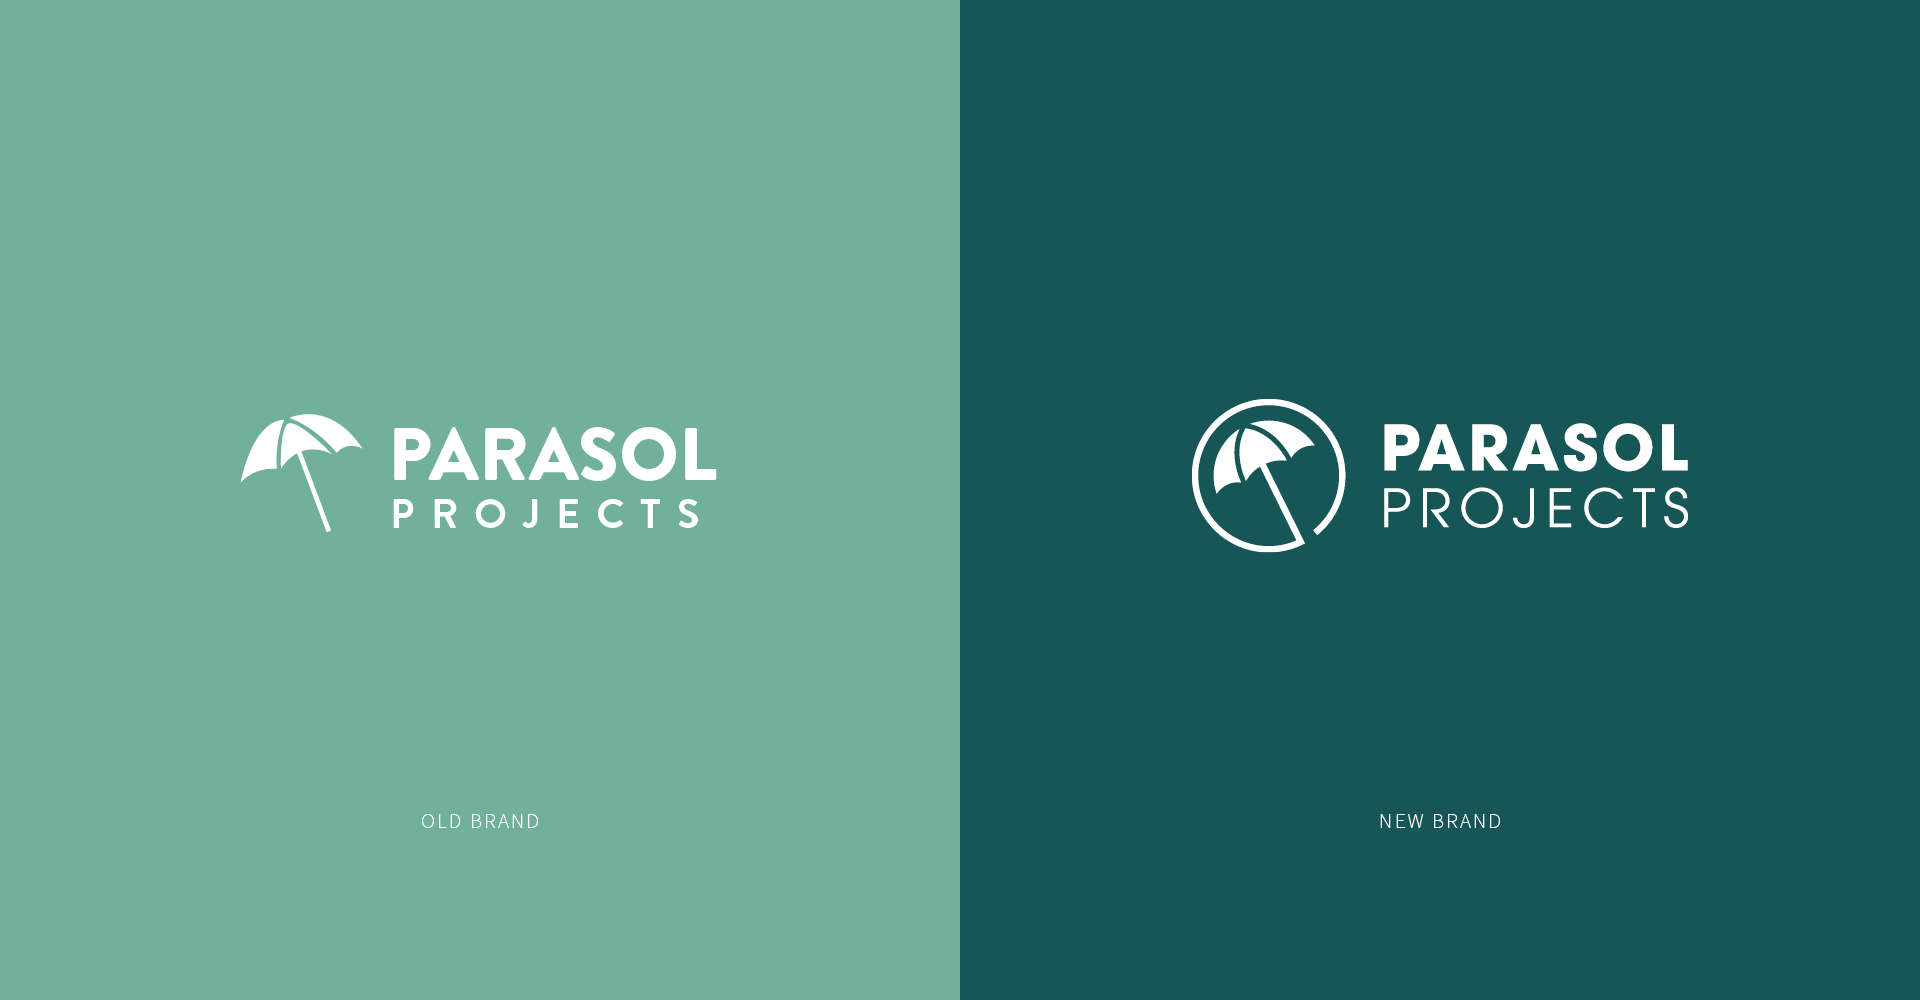 Parasol Projects branding before and after image